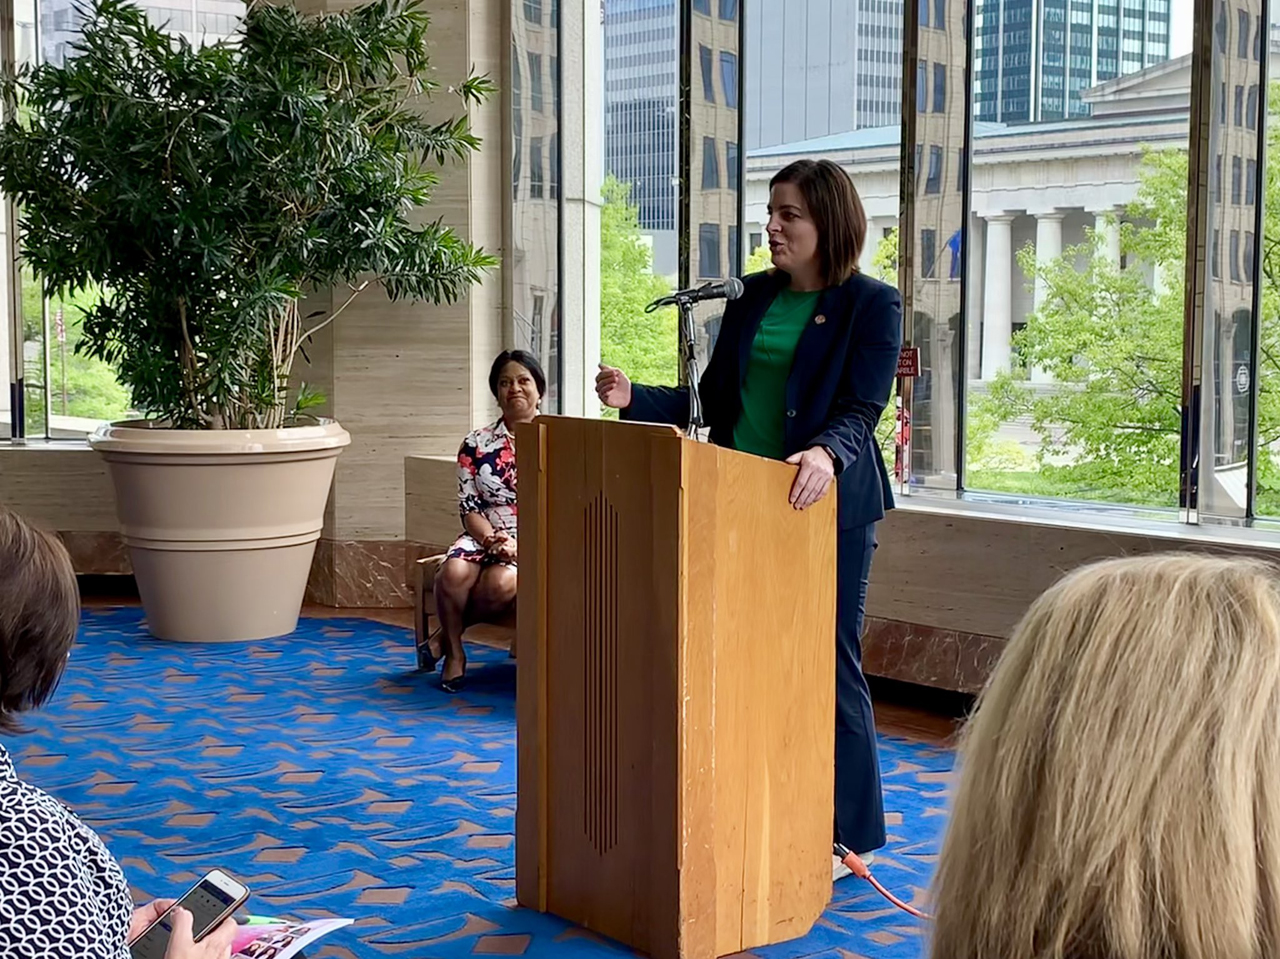 Rep. Kelly speaks at 2019 Women's Lobby Day